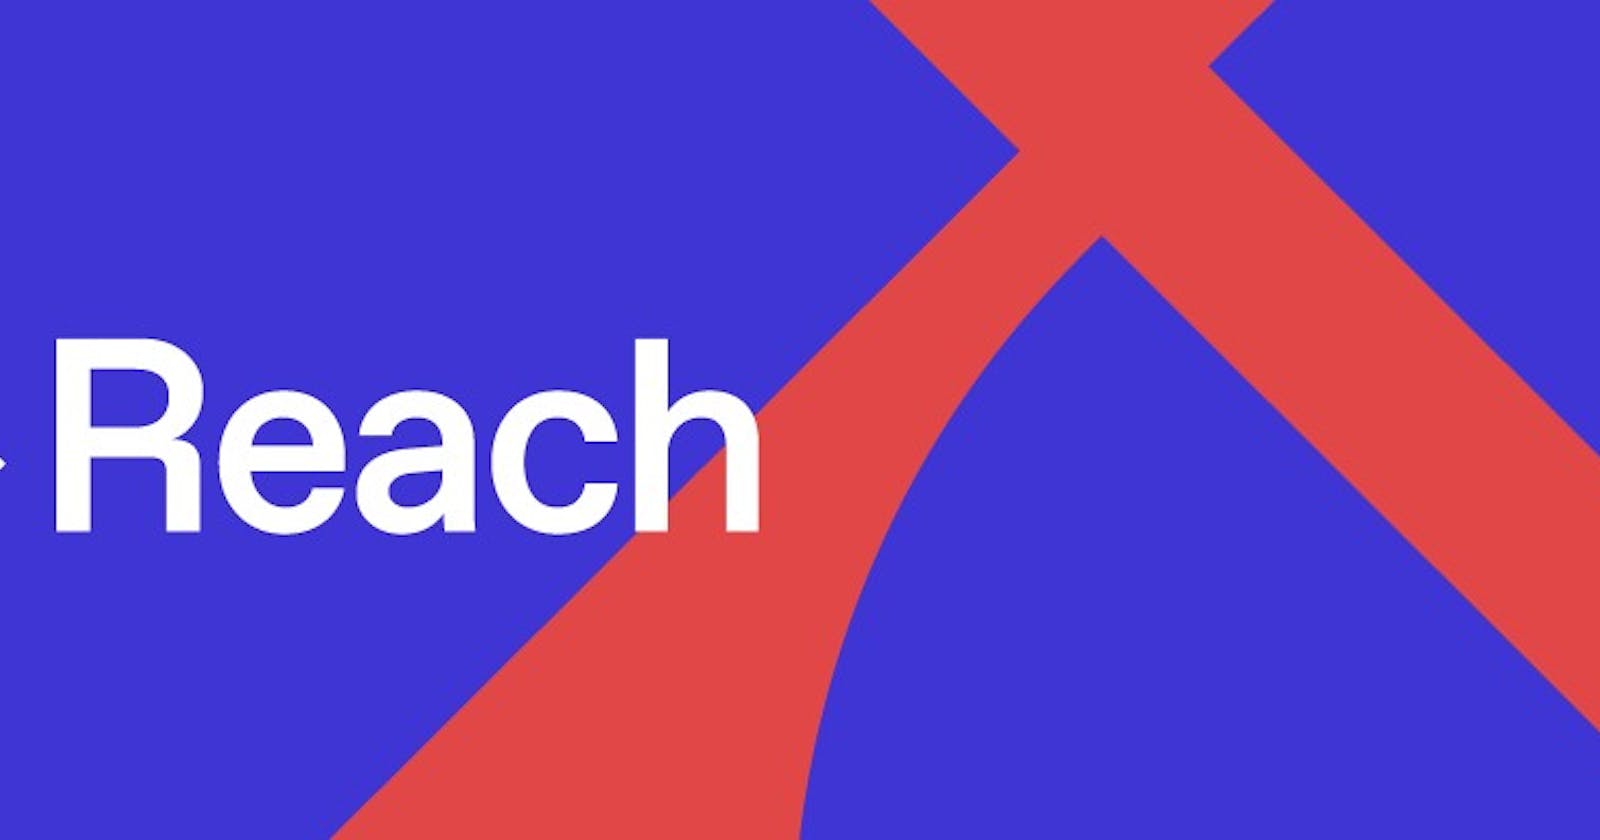 Understanding how the Reach smart contract interacts with a web frontend